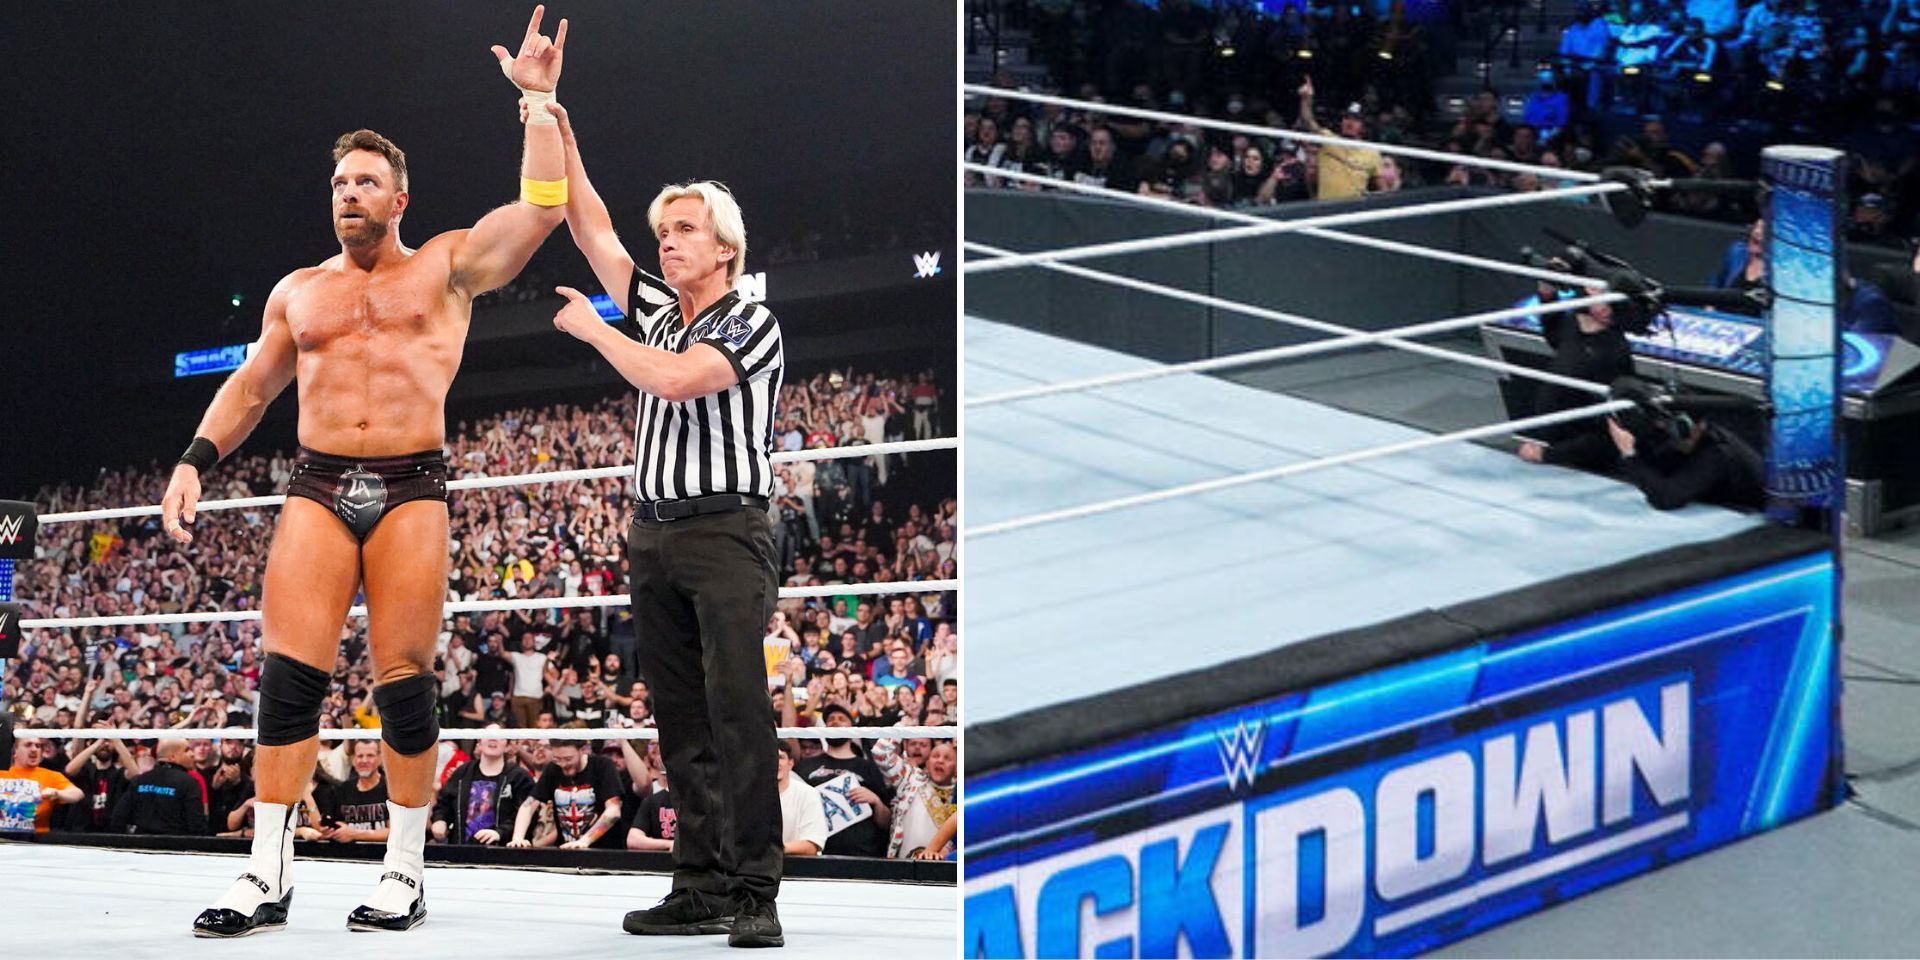 LA Knight emerged victorious on SmackDown (Images via WWE.com)